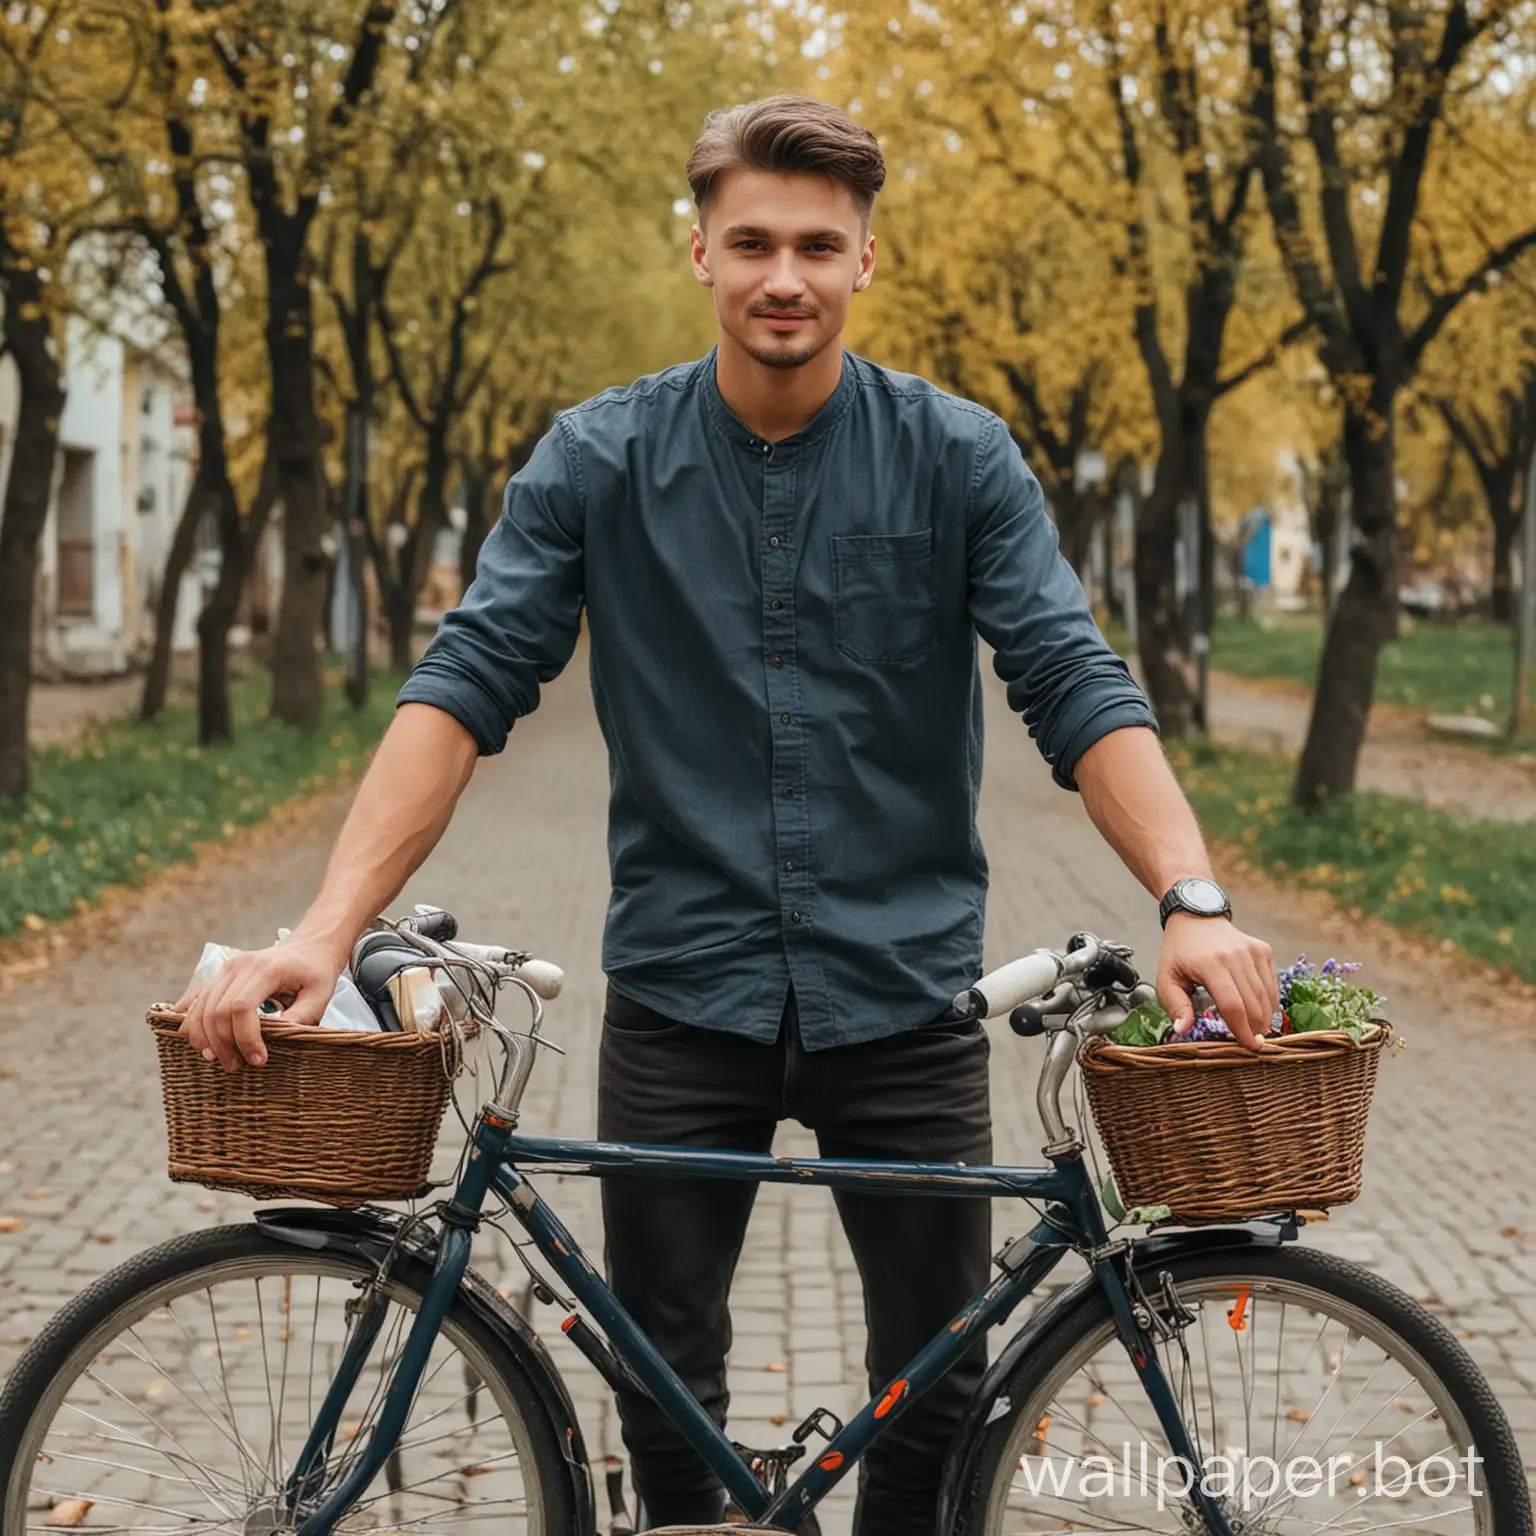 A handsome Ukrainian guy on a bicycle